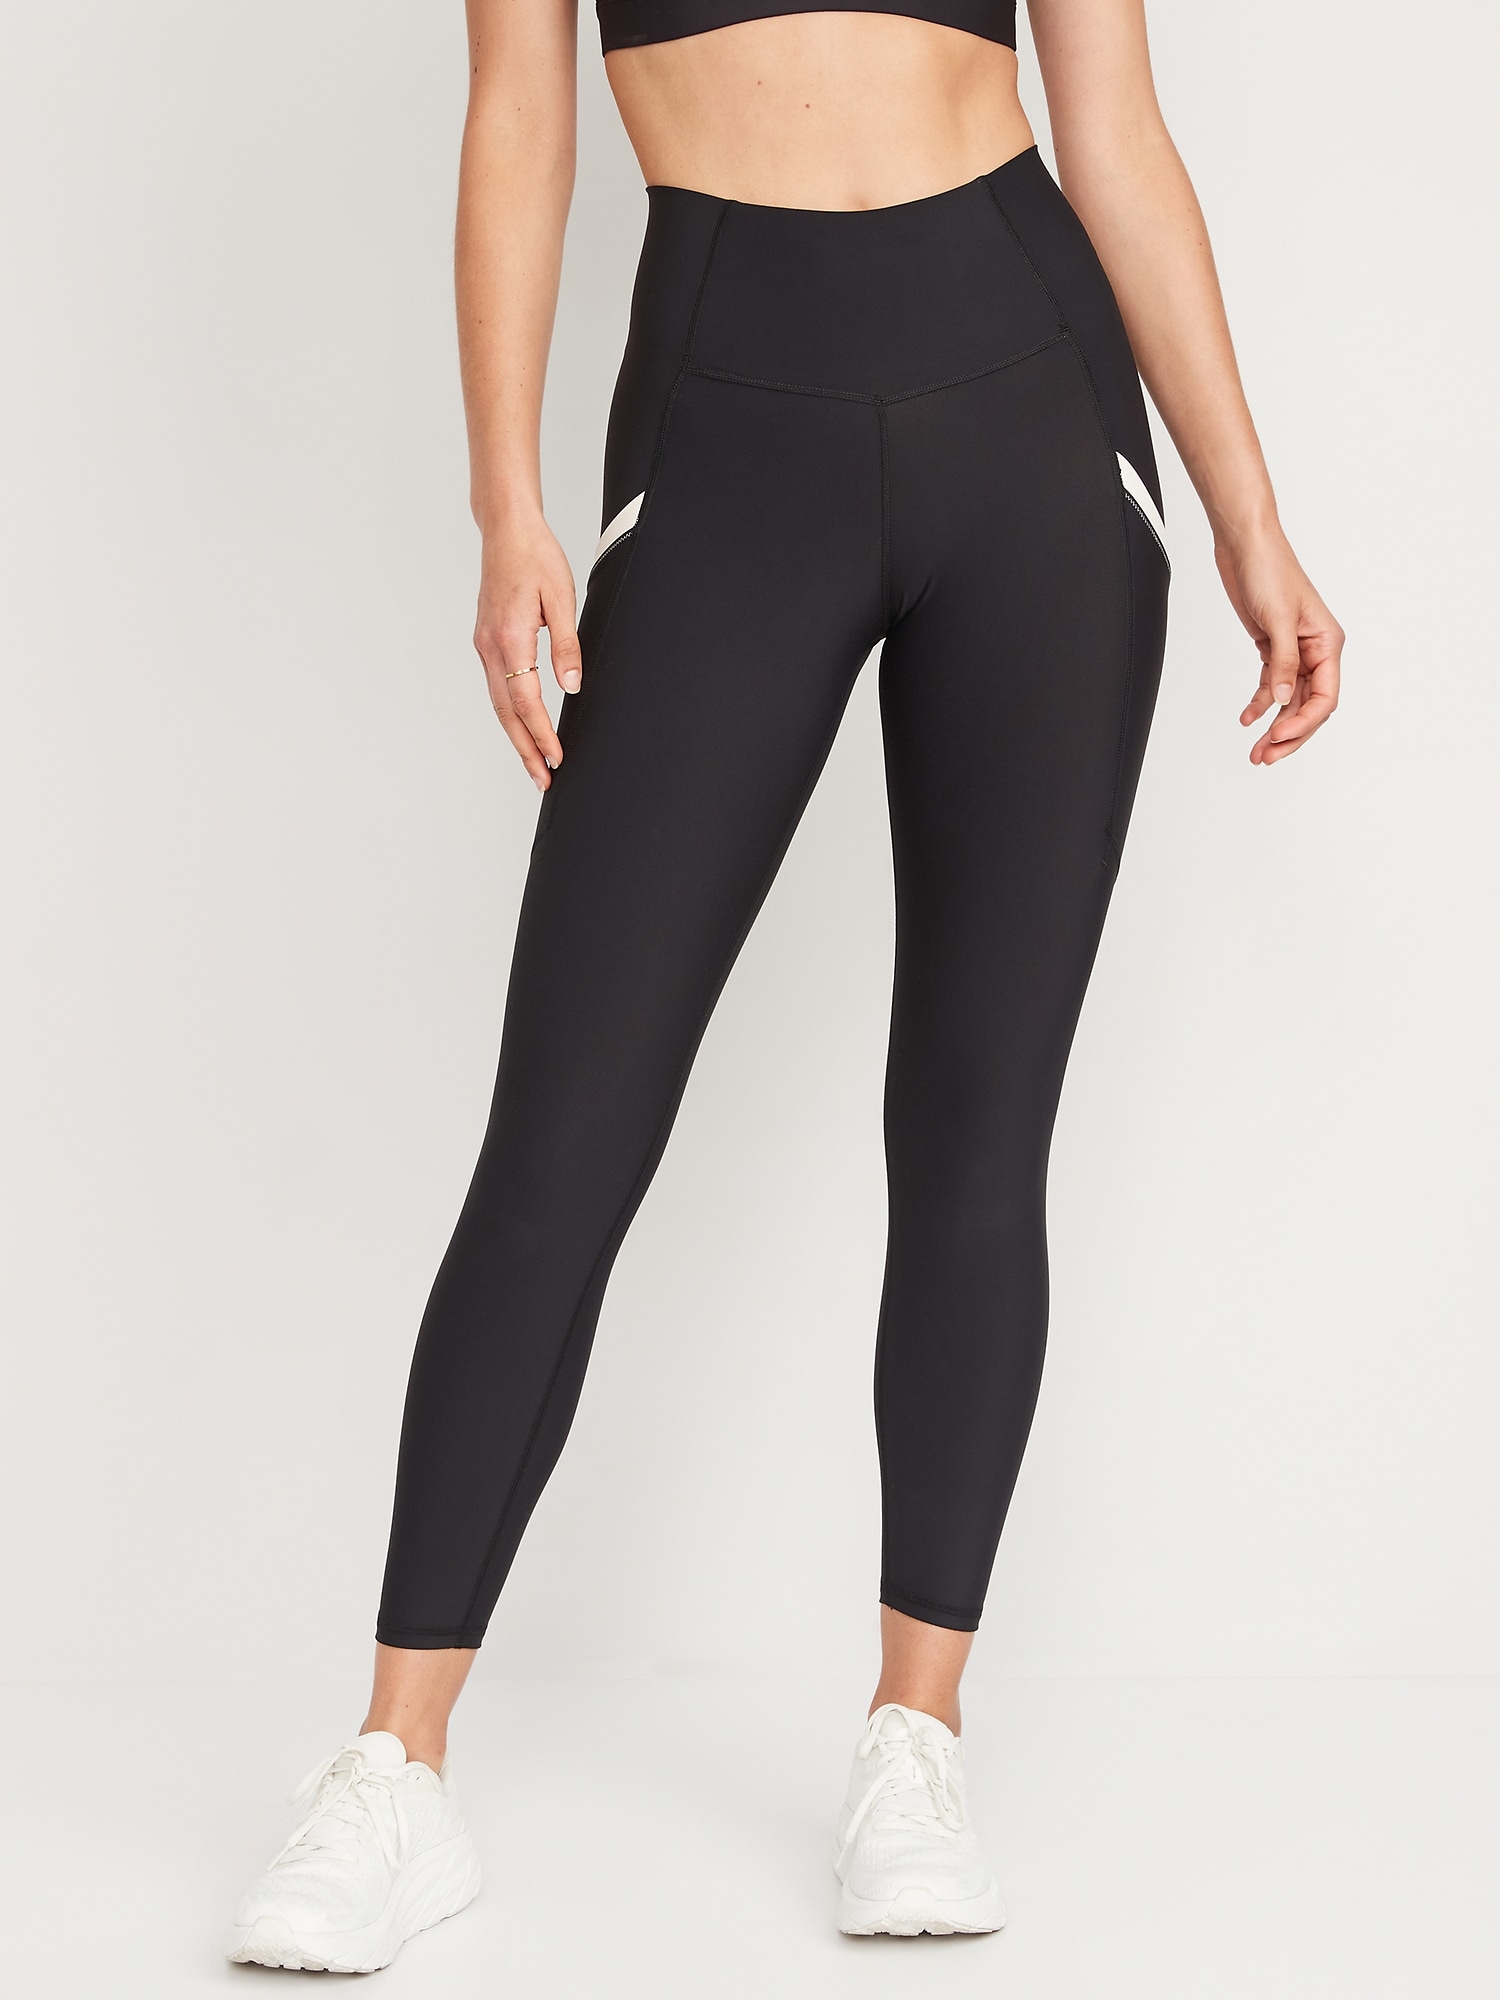 Leggings: Sweaty Betty Power Pocket Workout 7/8 Leggings, 32 Workout  Clothing Deals Worth Shopping From the Nordstrom Anniversary Sale